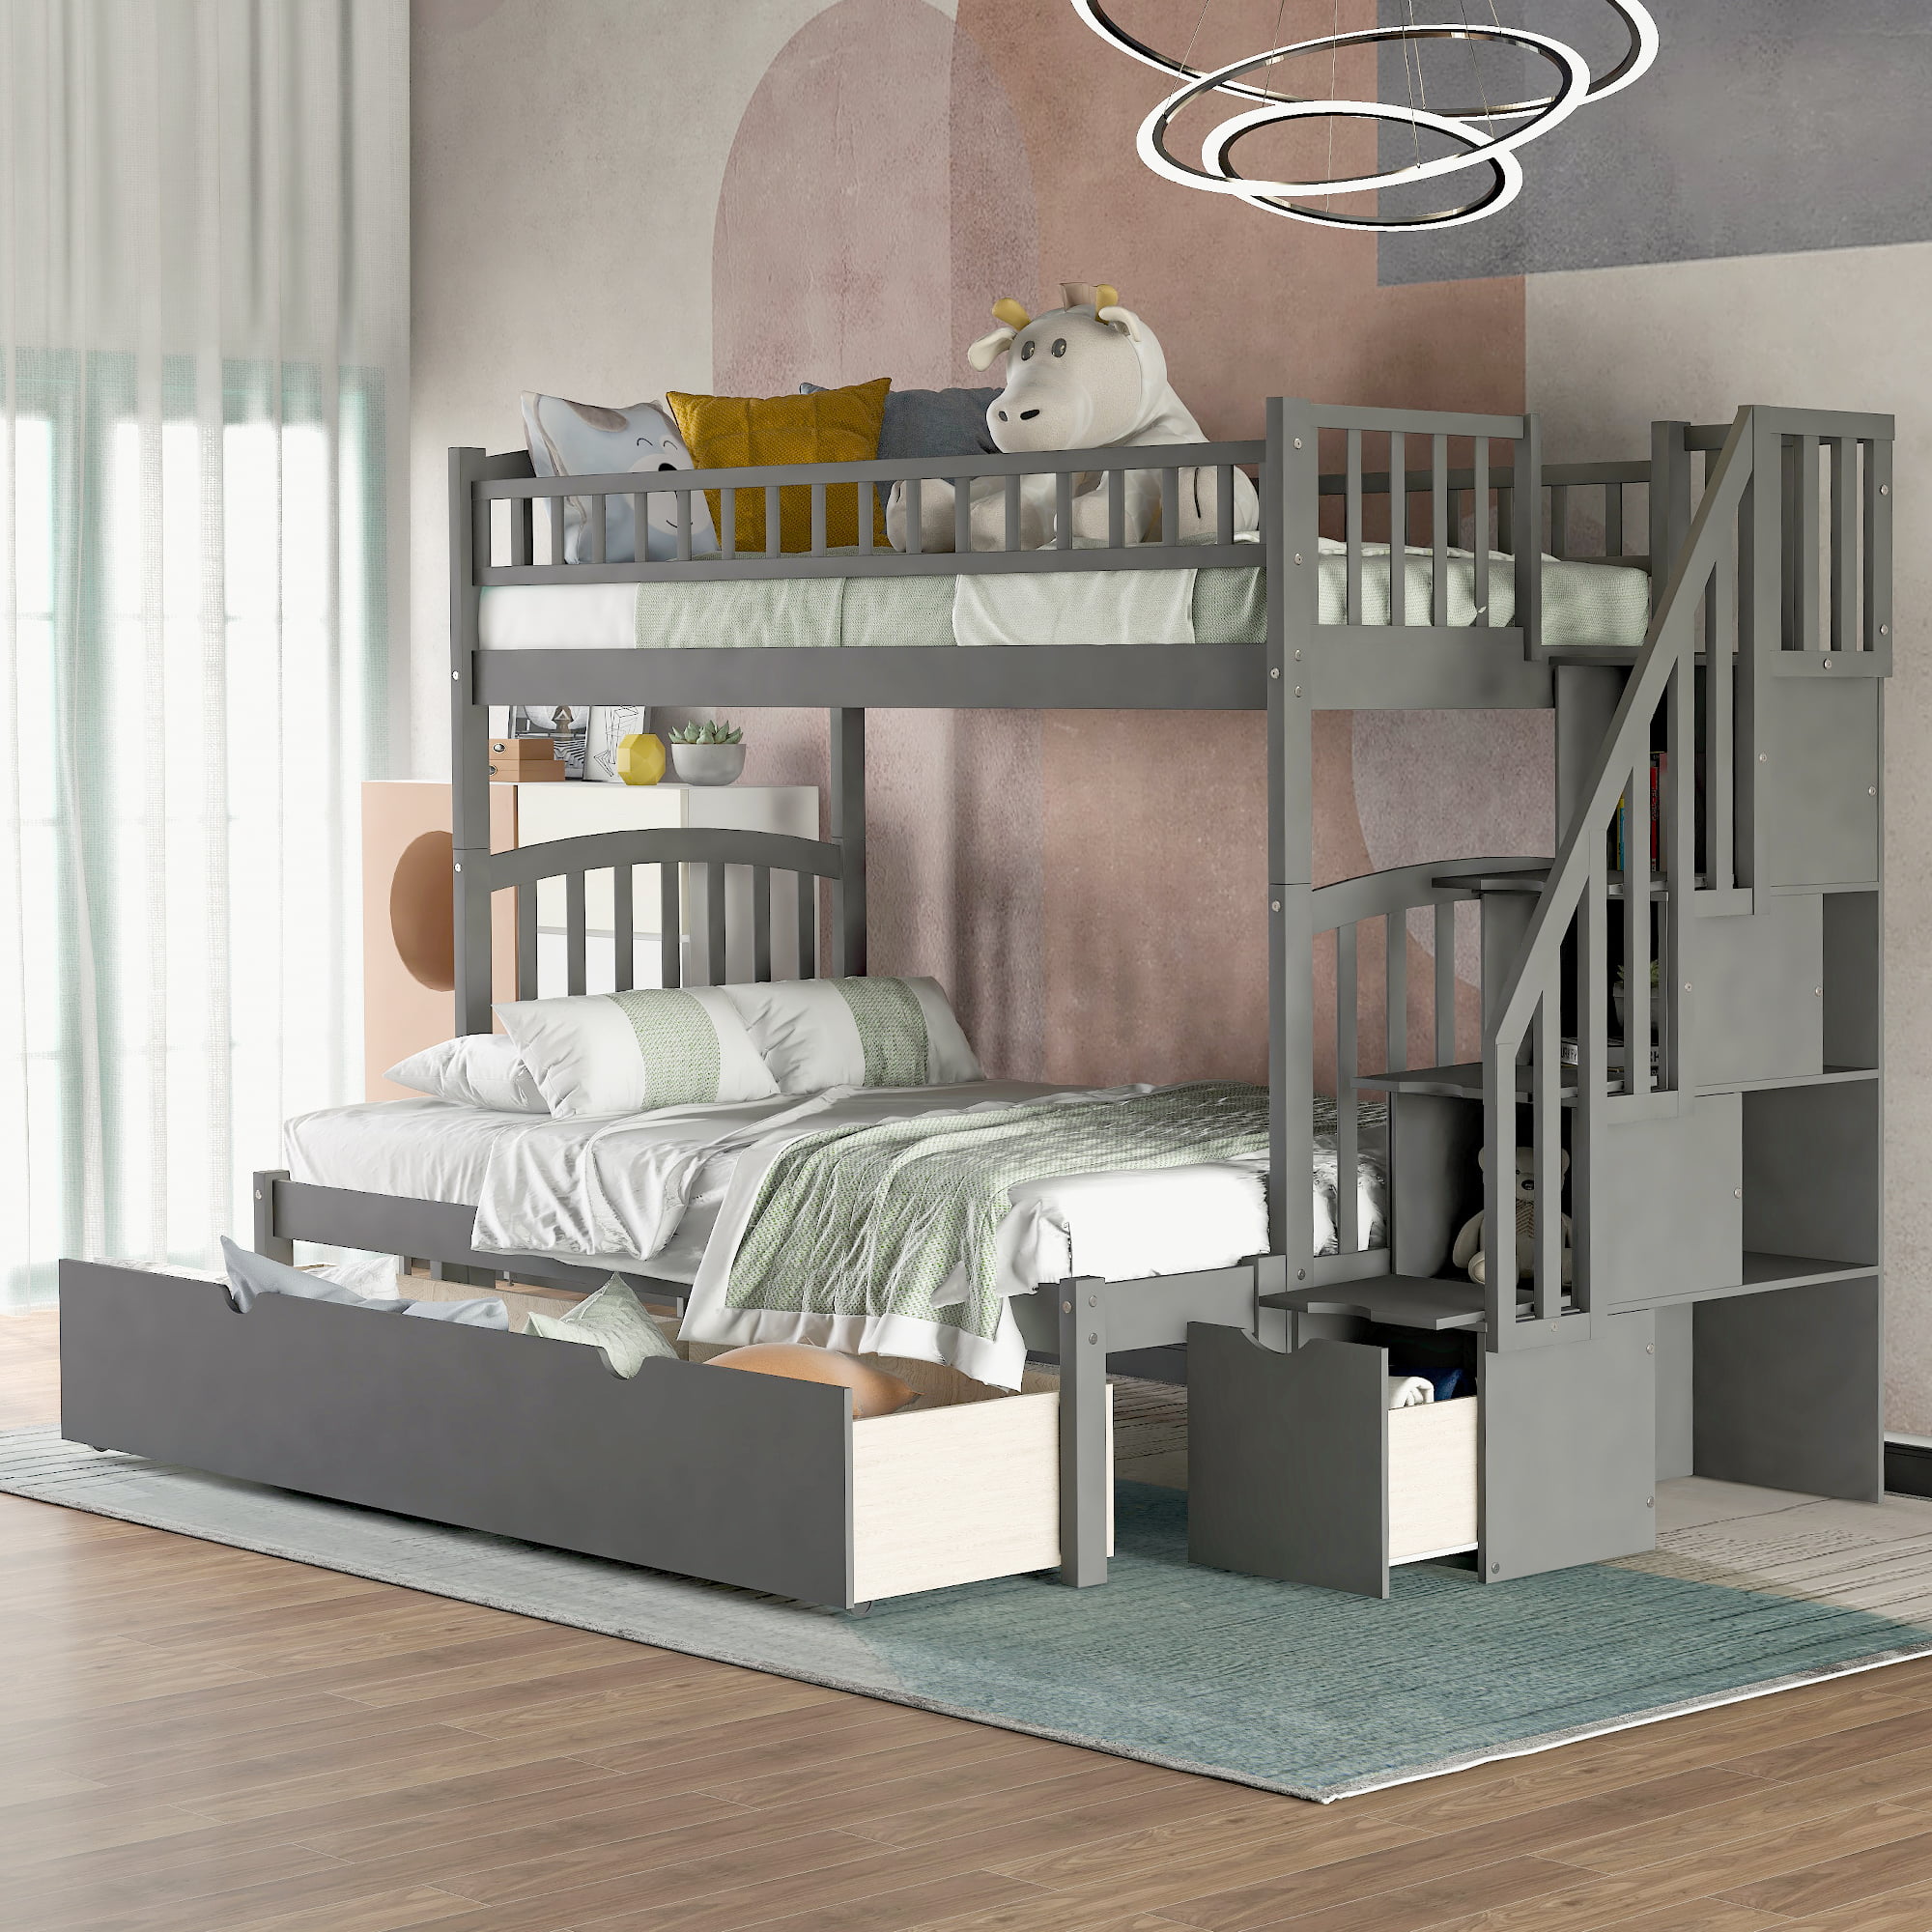 Euroco Solid Wood Twin Over Full Bunk, Gray Twin Over Full Bunk Bed With Stairs And Storage